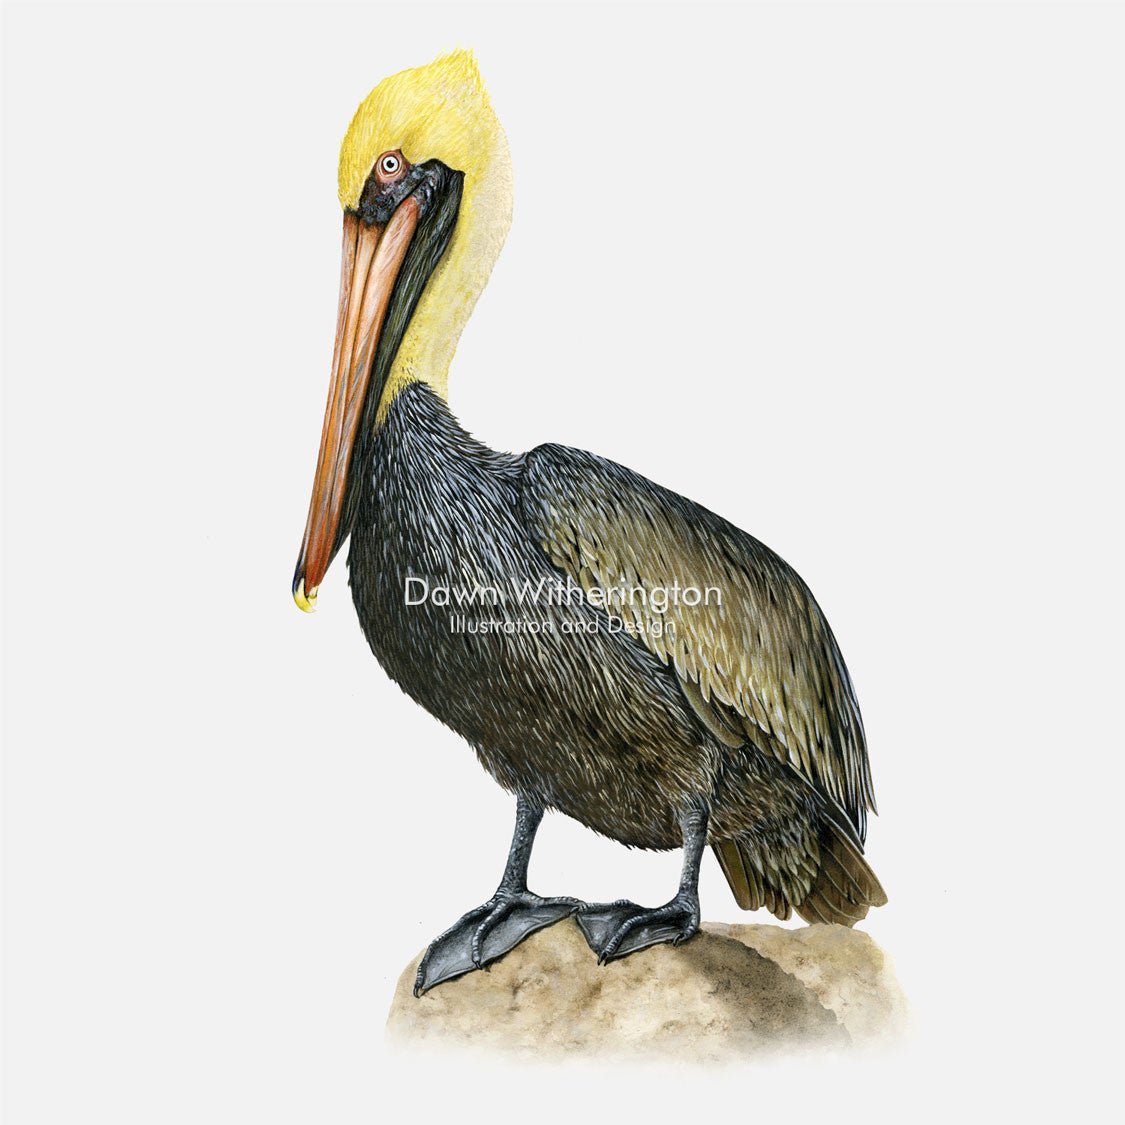 This beautiful illustration of a brown pelican, Pelecanus occidentalis, with chick, is biologically accurate in detail.